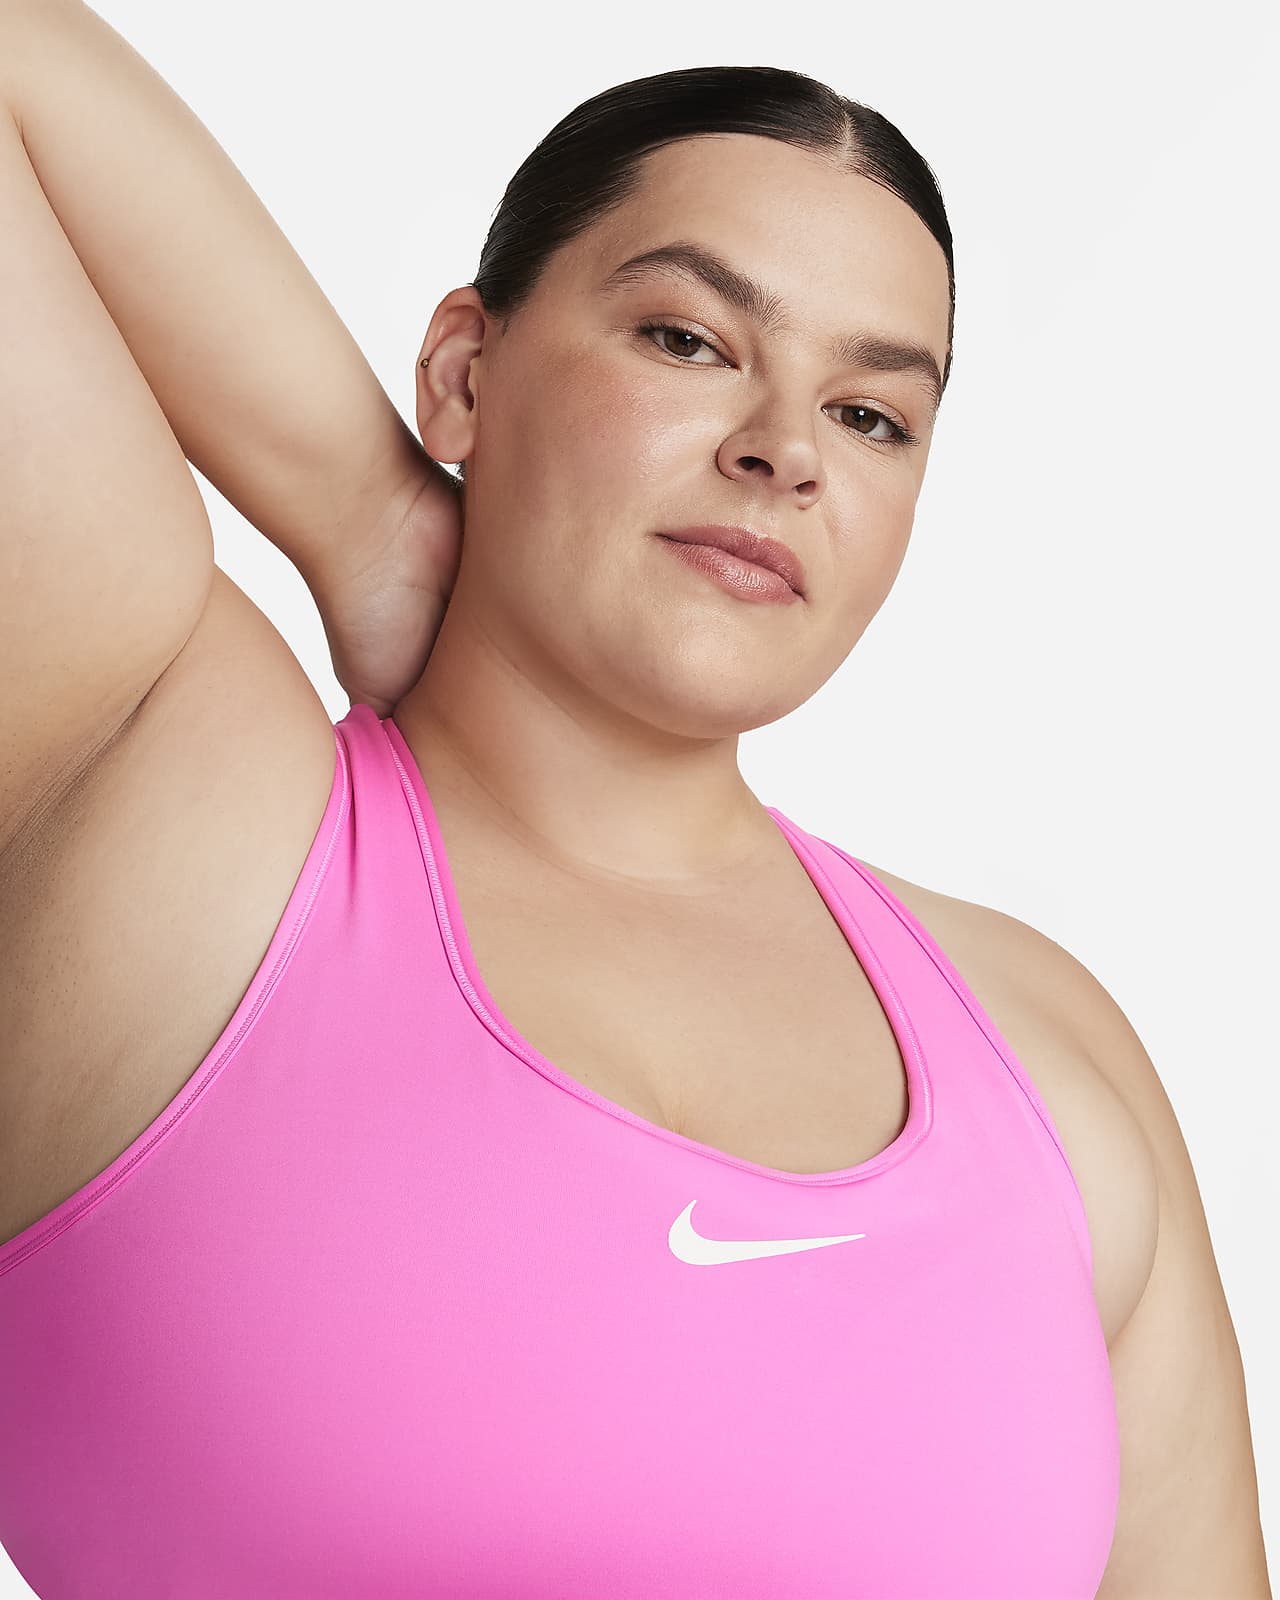 Intersport Malta - The Nike Dri-FIT Swoosh Sports Bra gives you the kind of  support you know you can count on. This non-padded style is made of soft,  smooth fabric and an